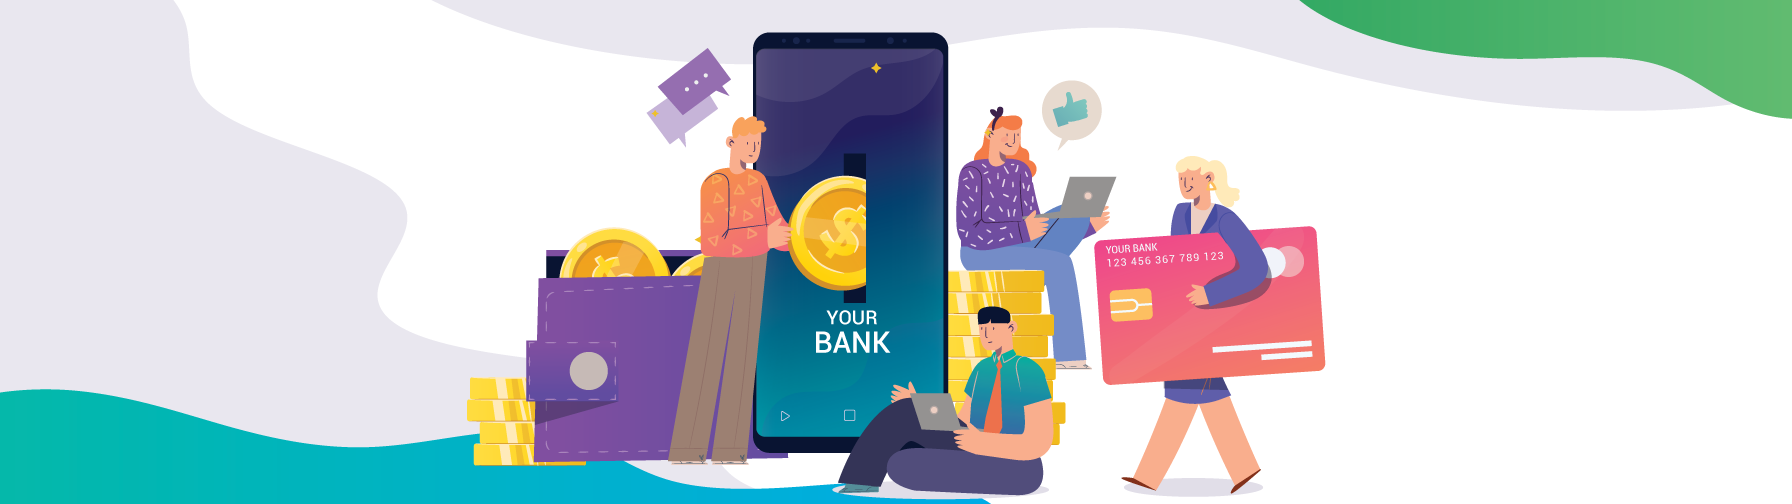 Smart Way of Banking – Open Banking